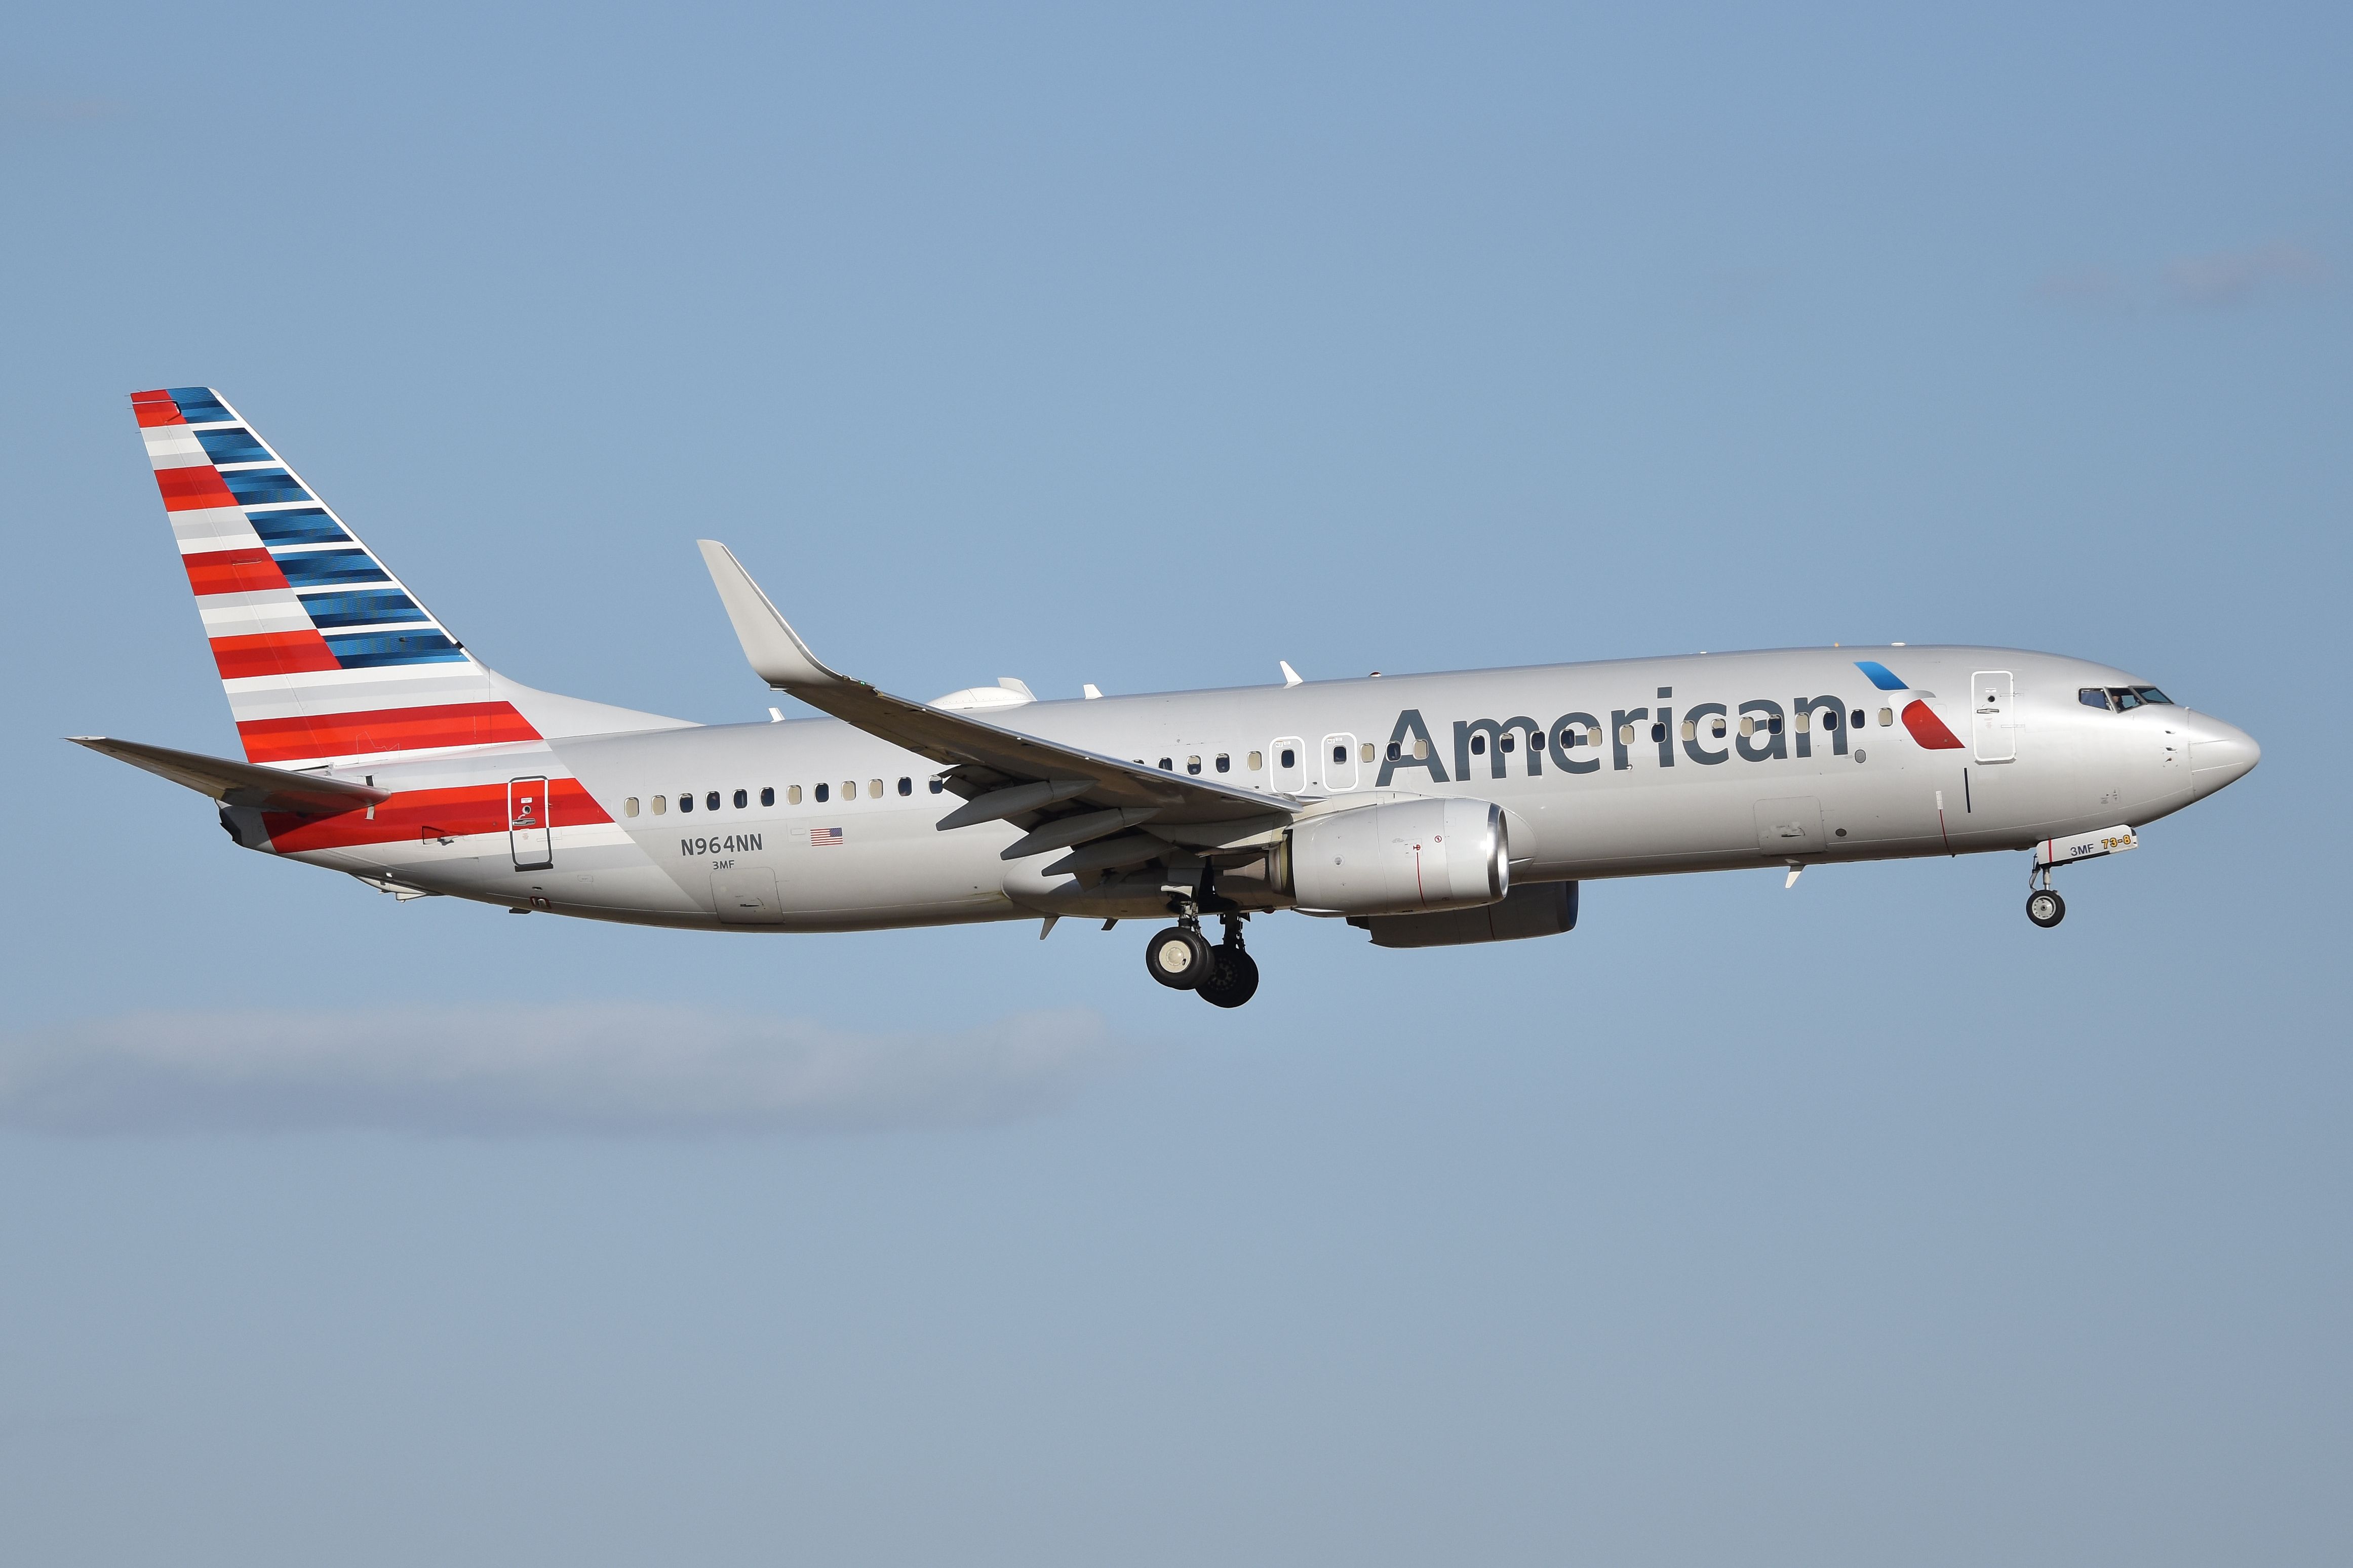 American Airlines flight takes off